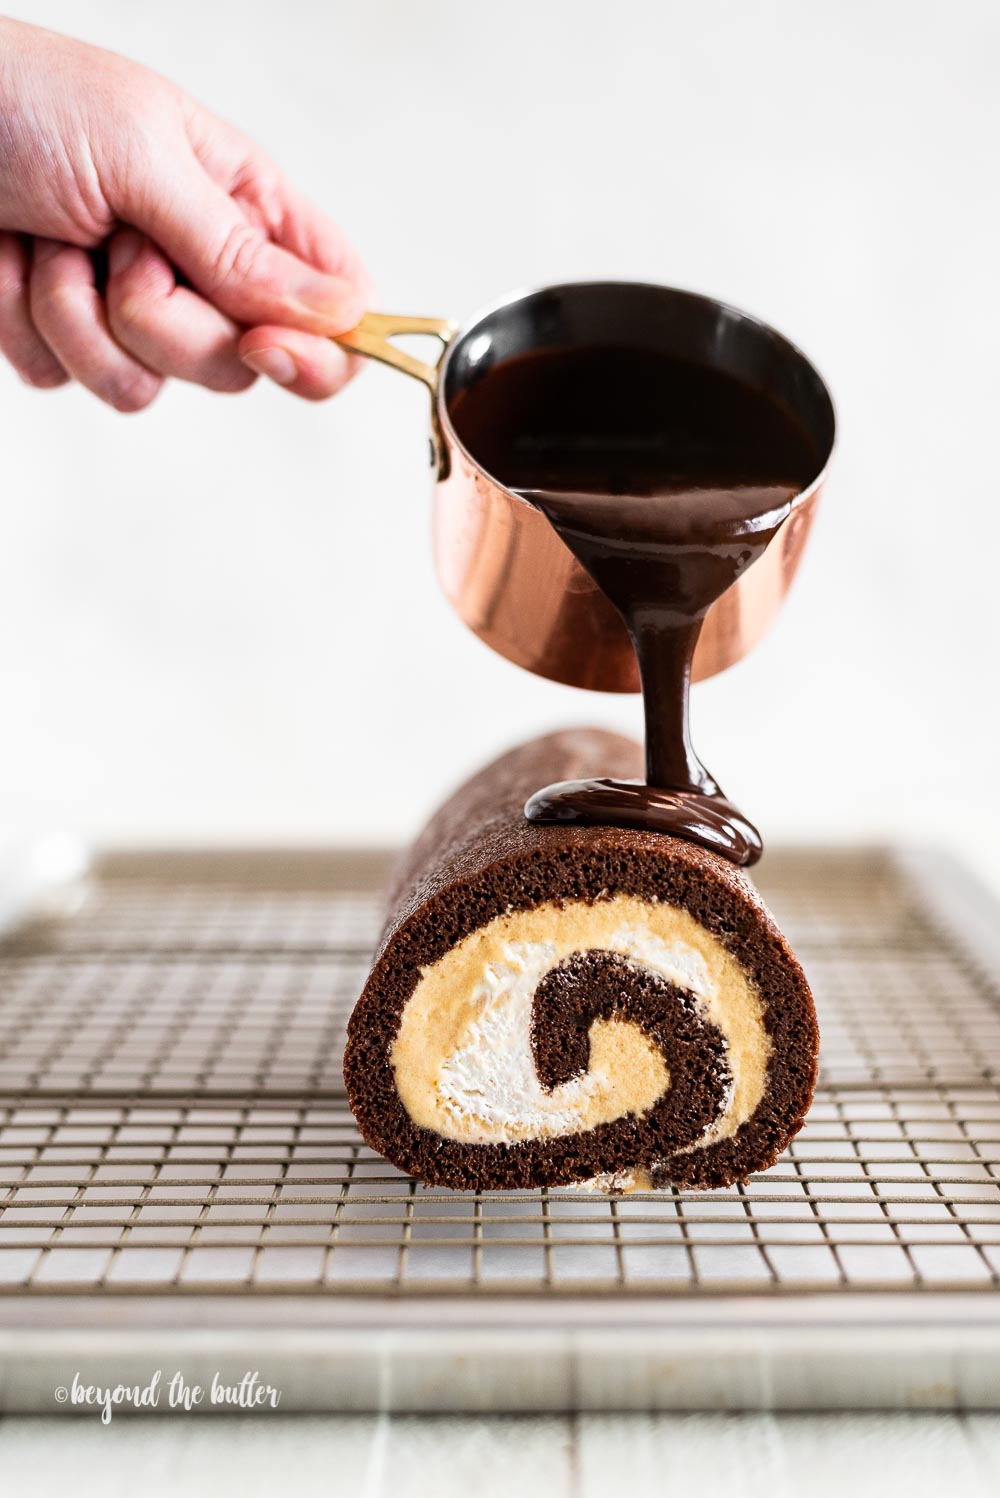 How to Make a Chocolate Pumpkin Roll | All Images © Beyond the Butter, LLC